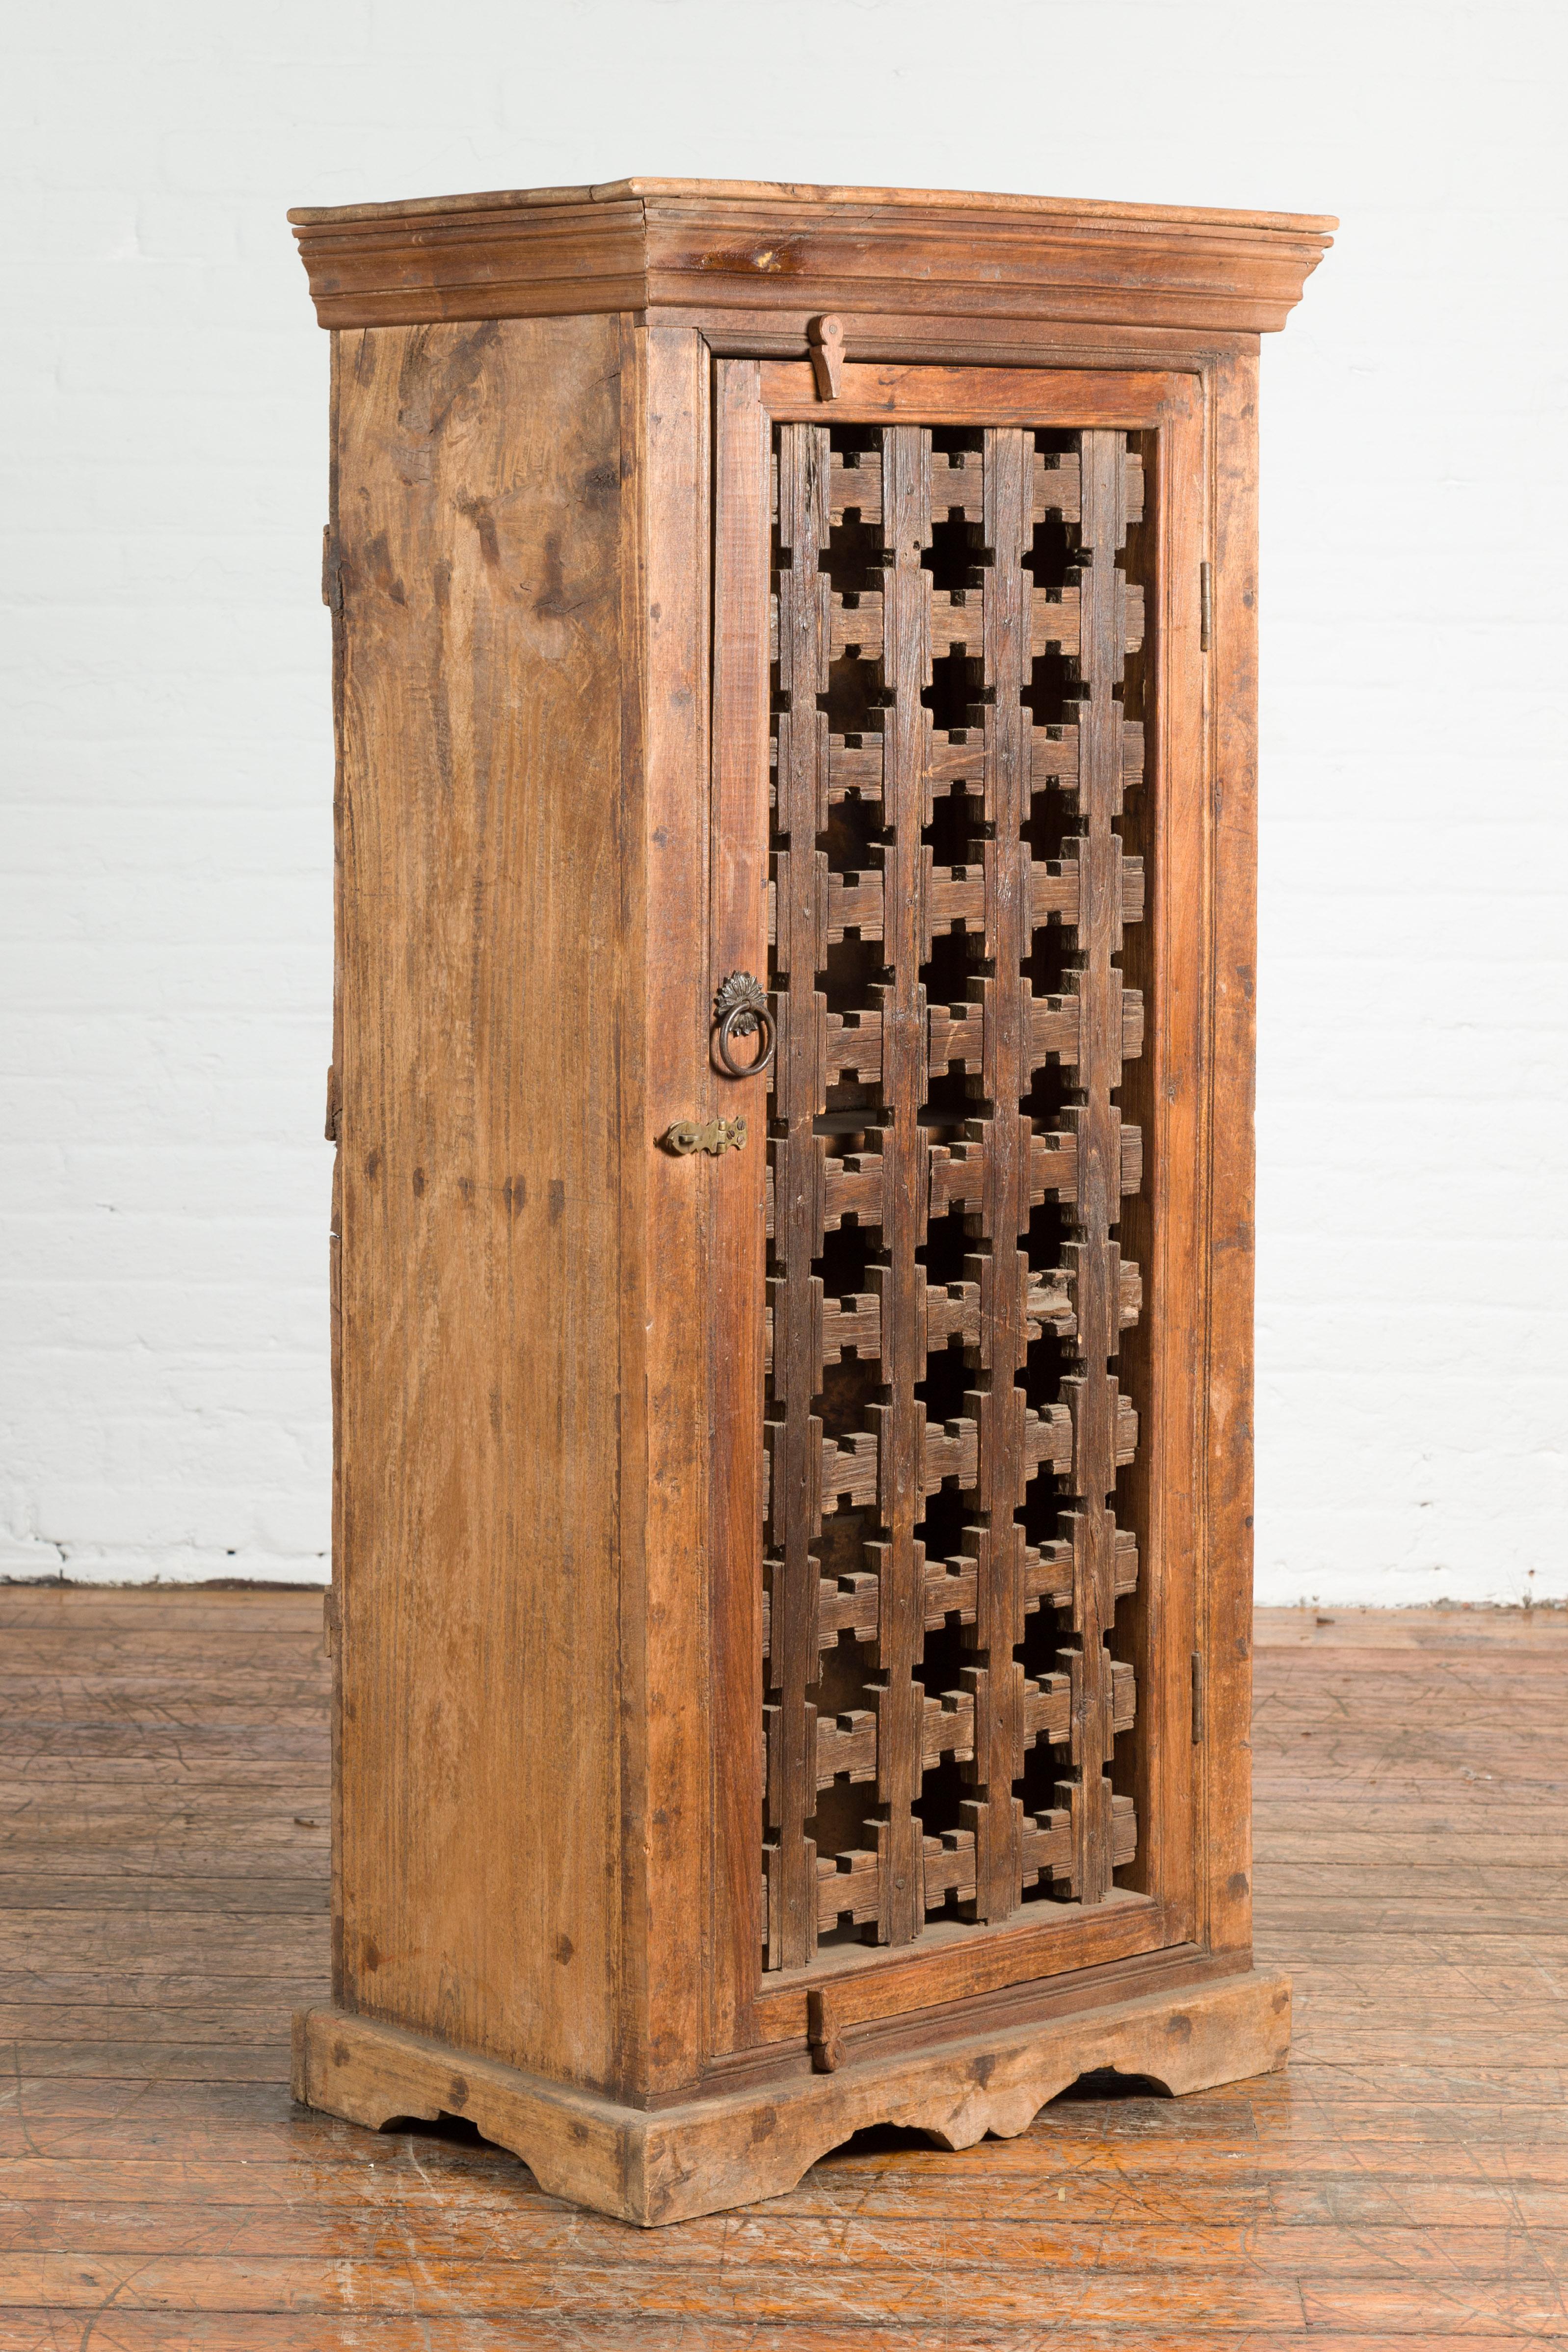 An Indian wooden cabinet from the 19th century, with single fretwork door and brass ring handle. Created in India during the 19th century, this wooden cabinet features a single door adorned with hand-carved geometric fretwork patterns. The piece is